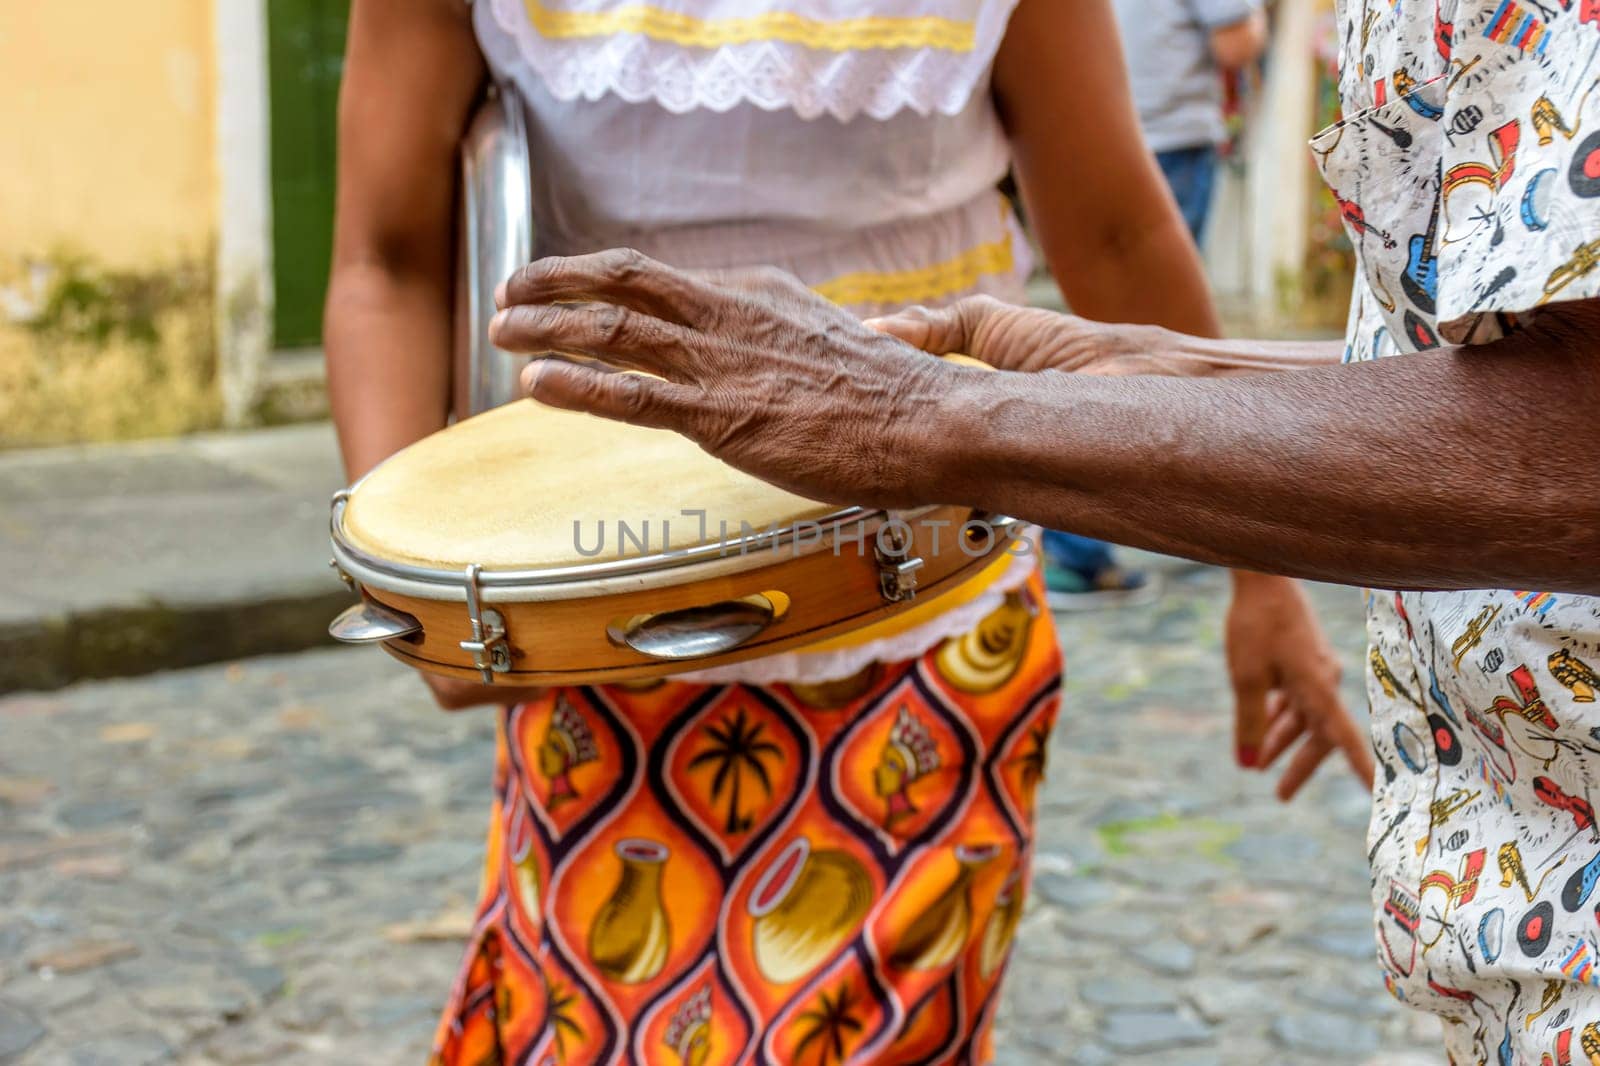 Tambourine player with a woman in typical clothes dancing in the background by Fred_Pinheiro